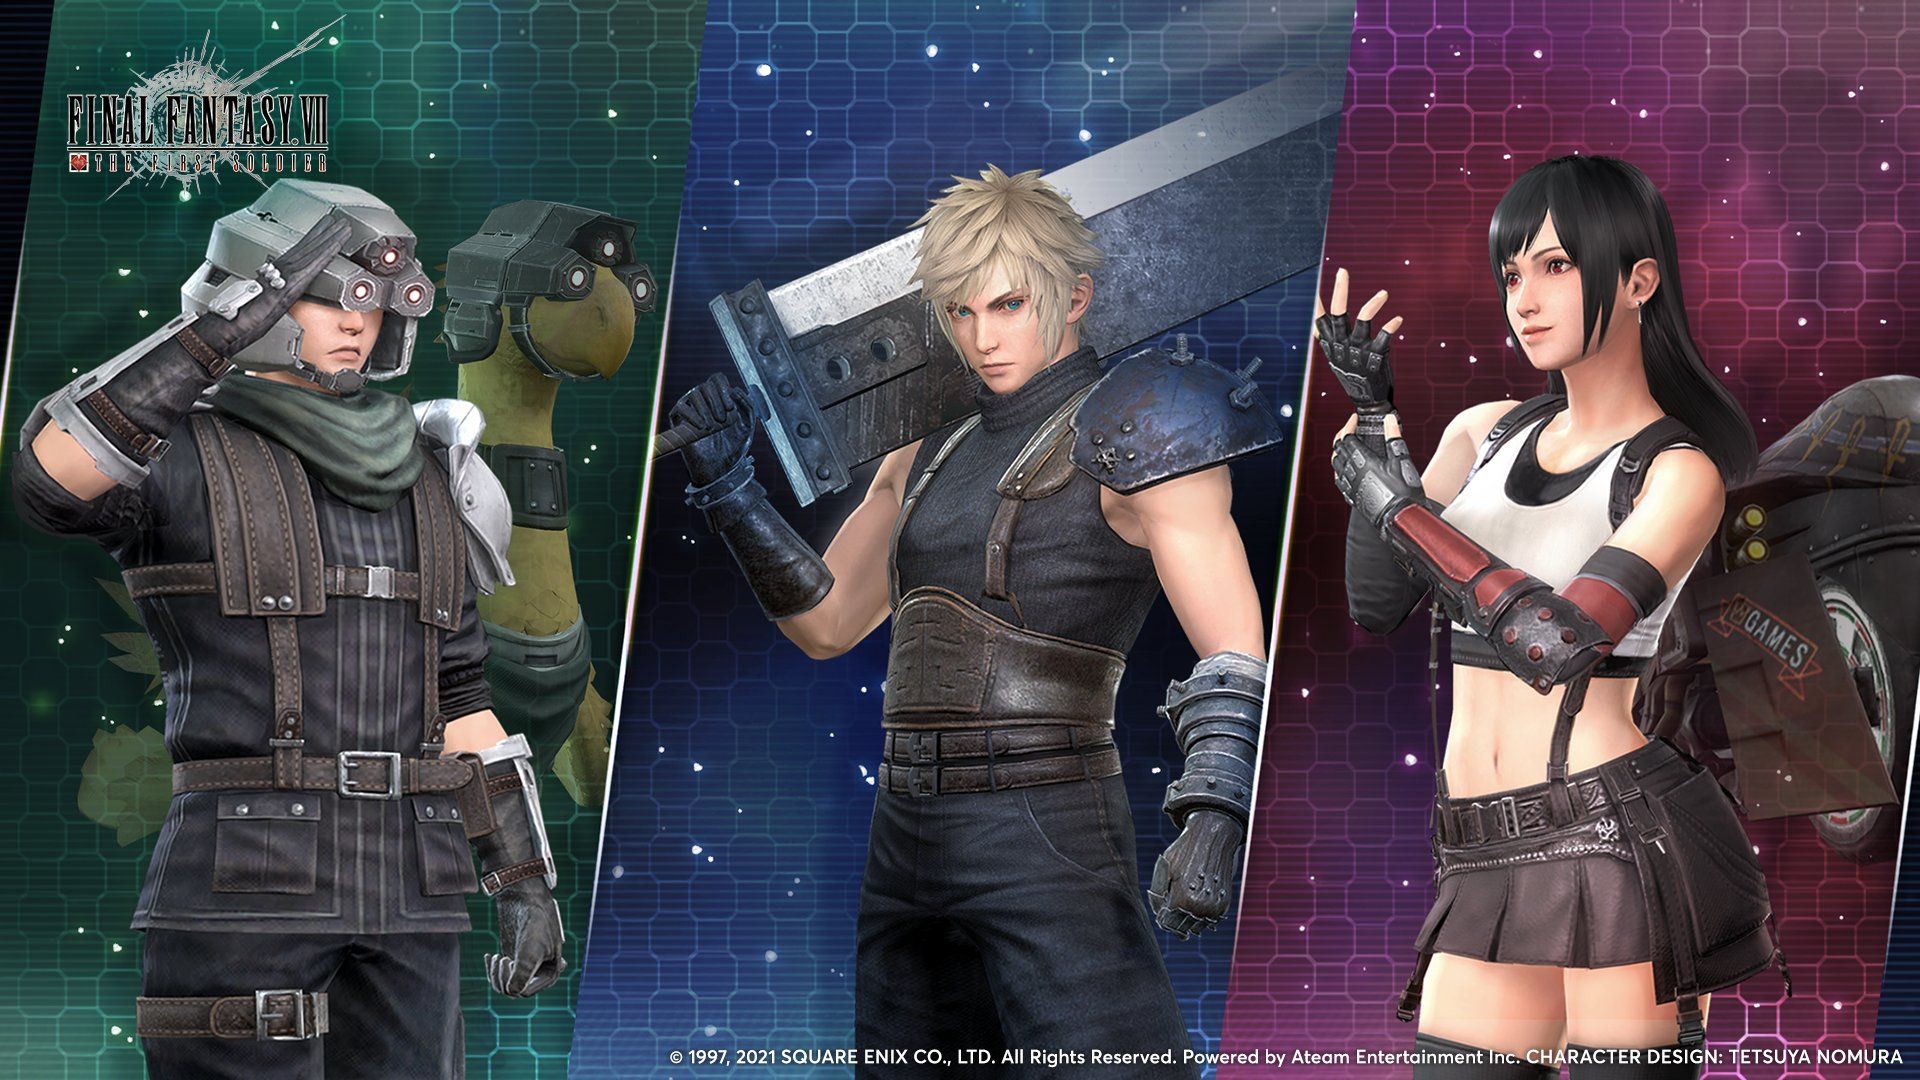 Final Fantasy VII The First Soldier Shuts Down In January - Game Informer